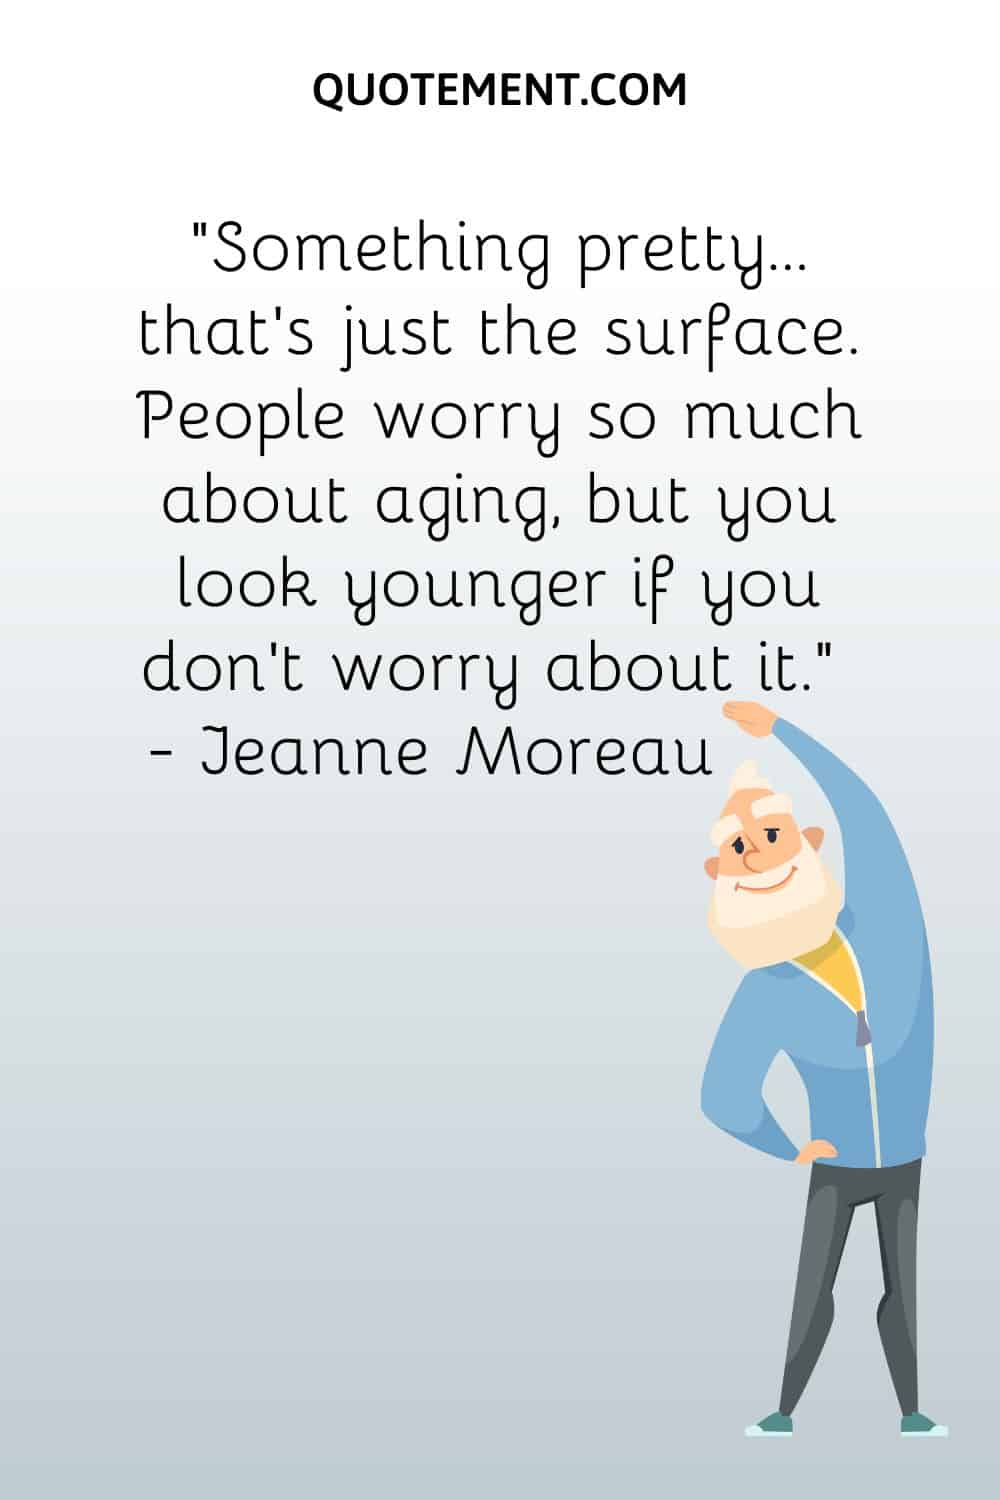 People worry so much about aging, but you look younger if you don’t worry about it